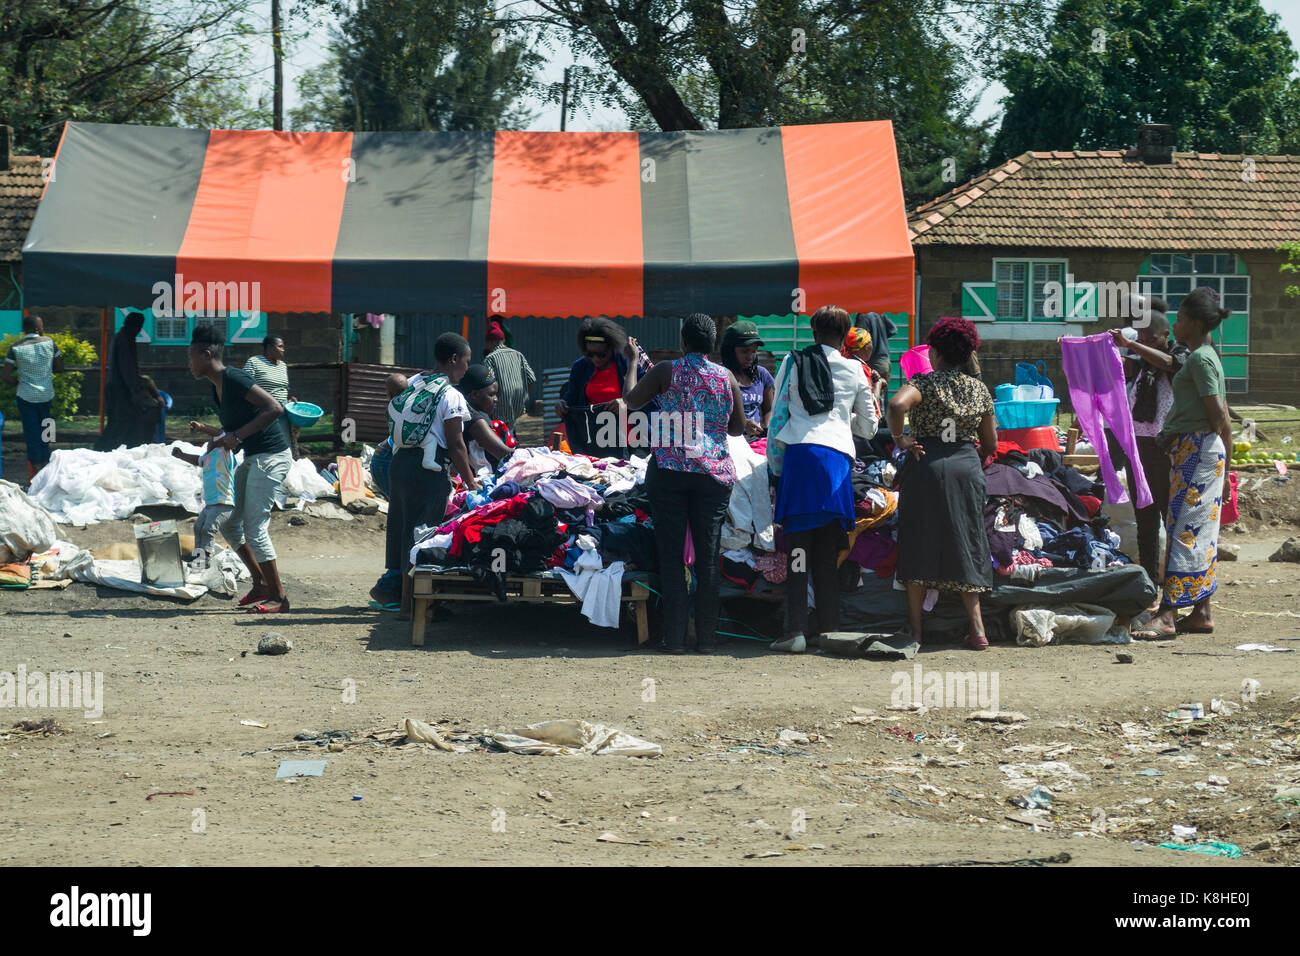 Several women browse through clothes on stall by roadside, Nairobi, Kenya Stock Photo